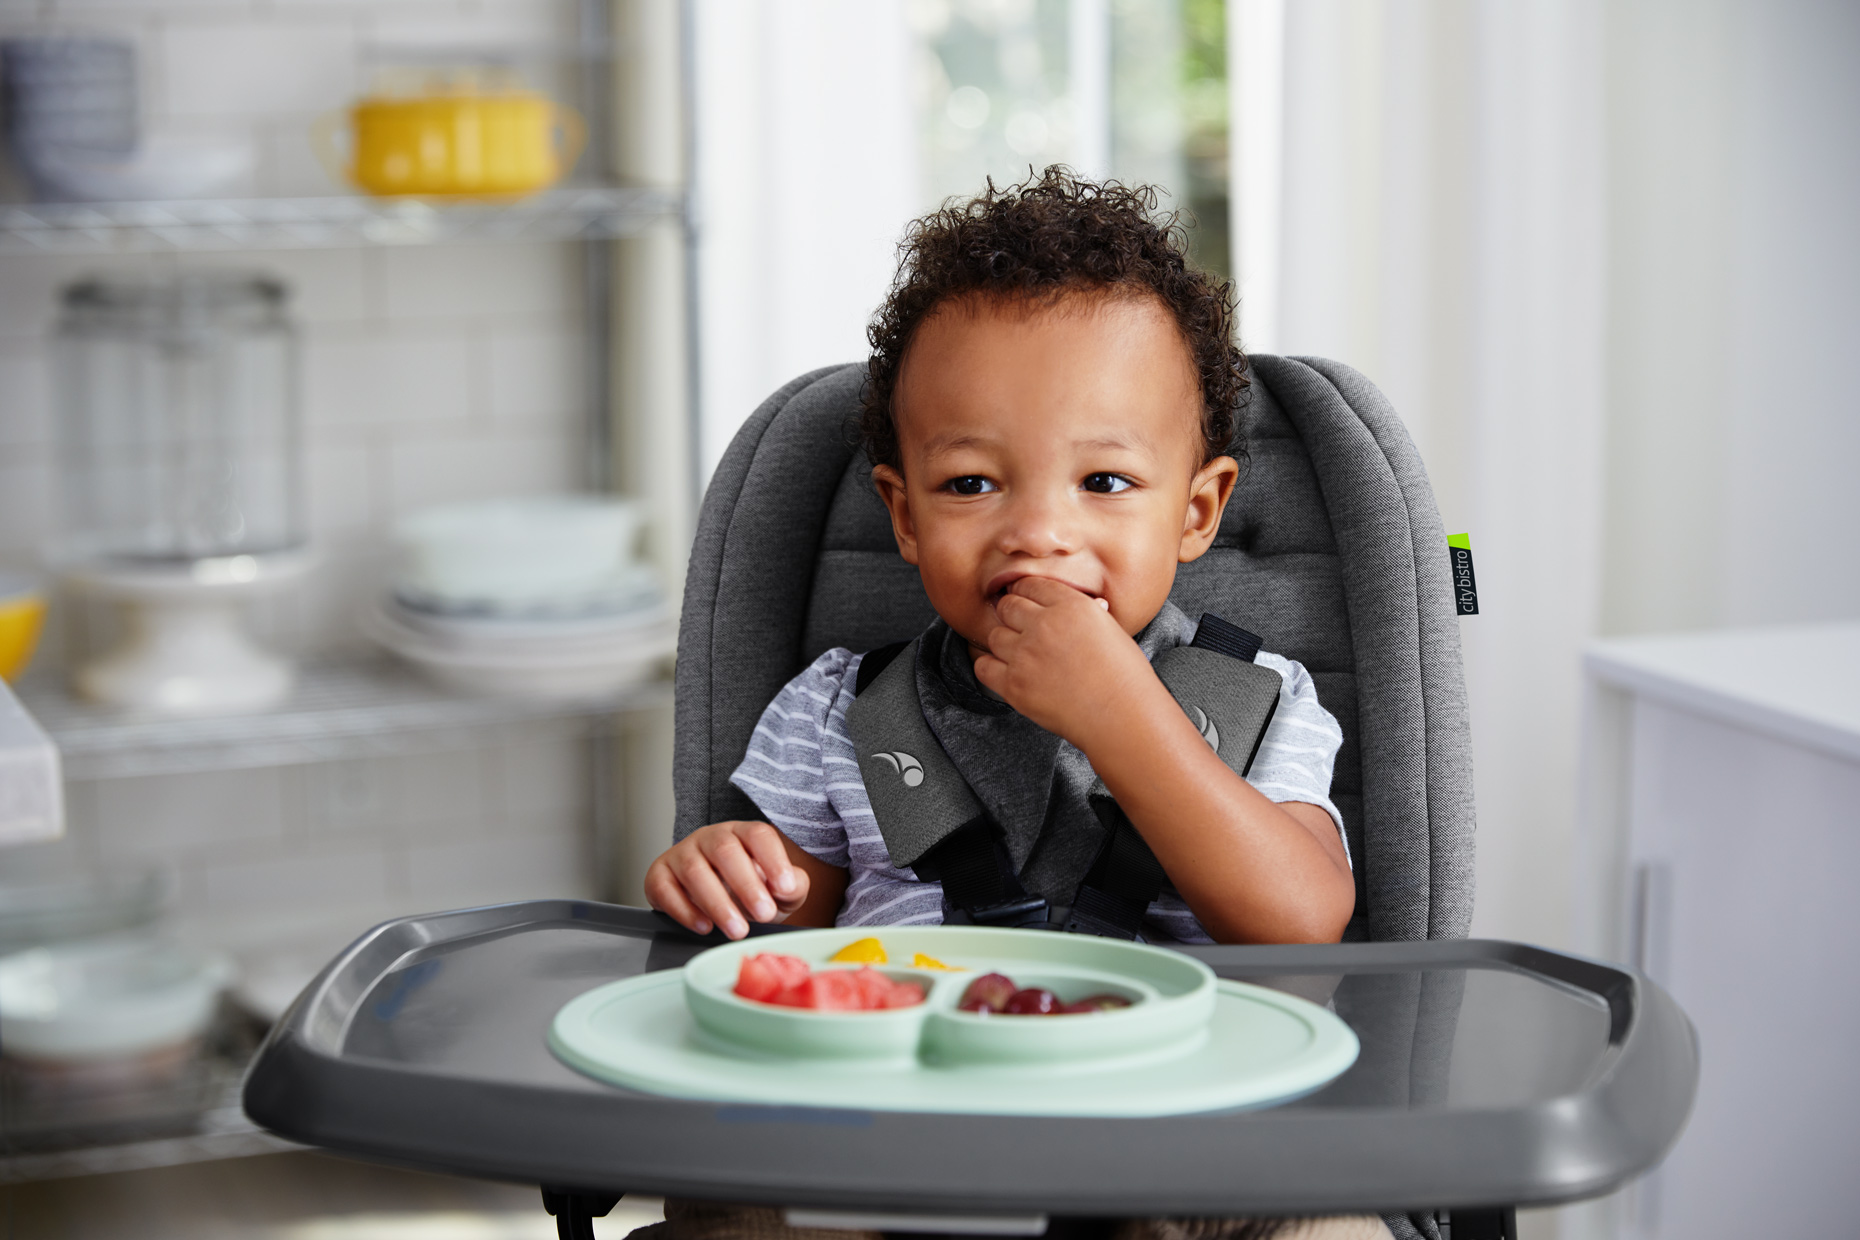 BabyJogger_BBJ_City-Bistro_close-up-of-child-eating-in-chair_4816